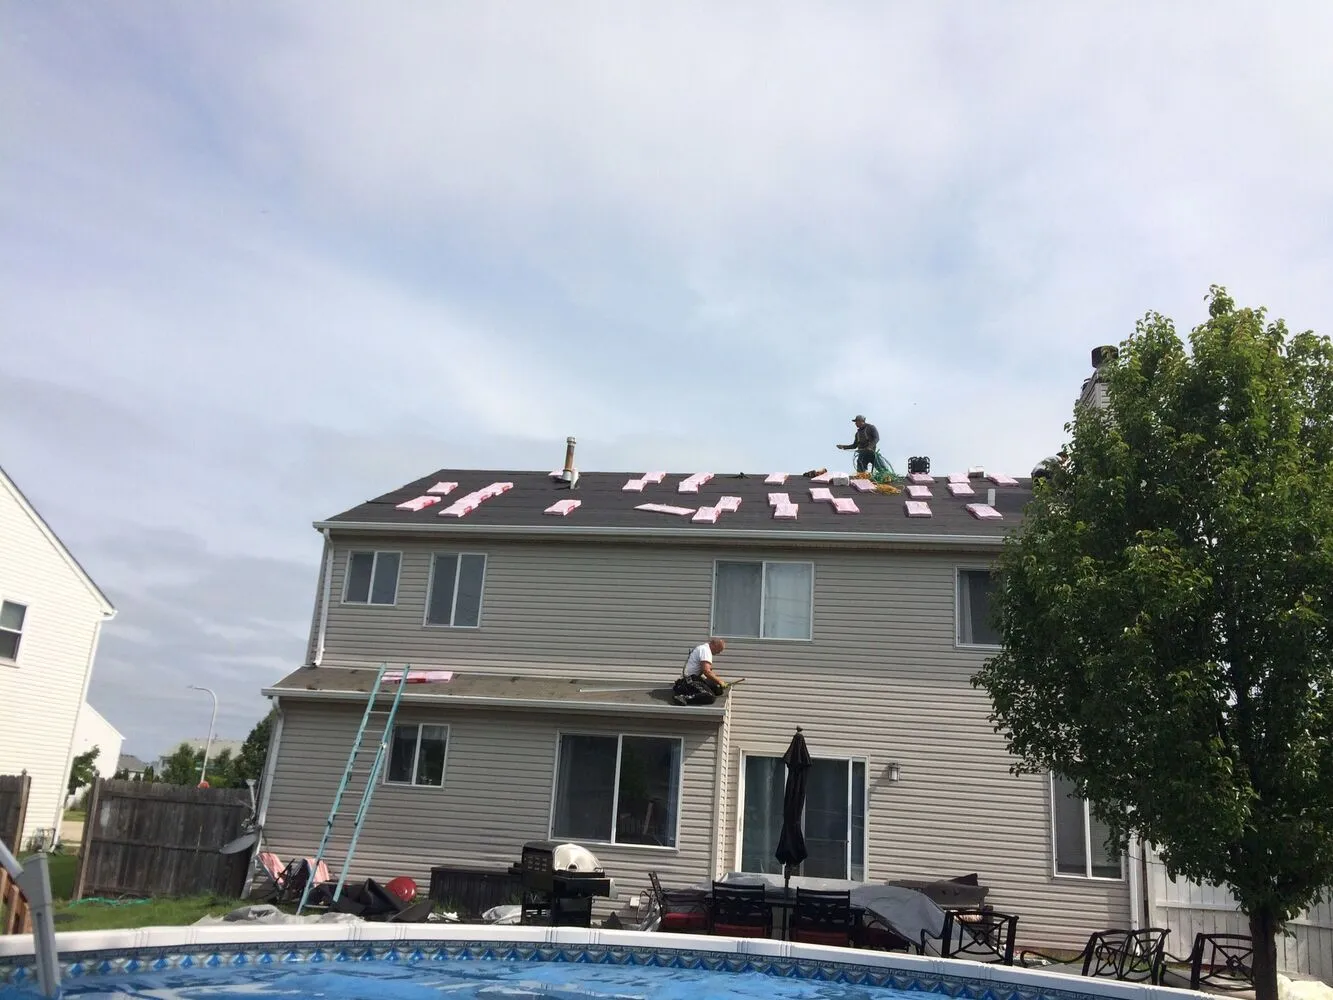 roofing contractor team working on the roof installation